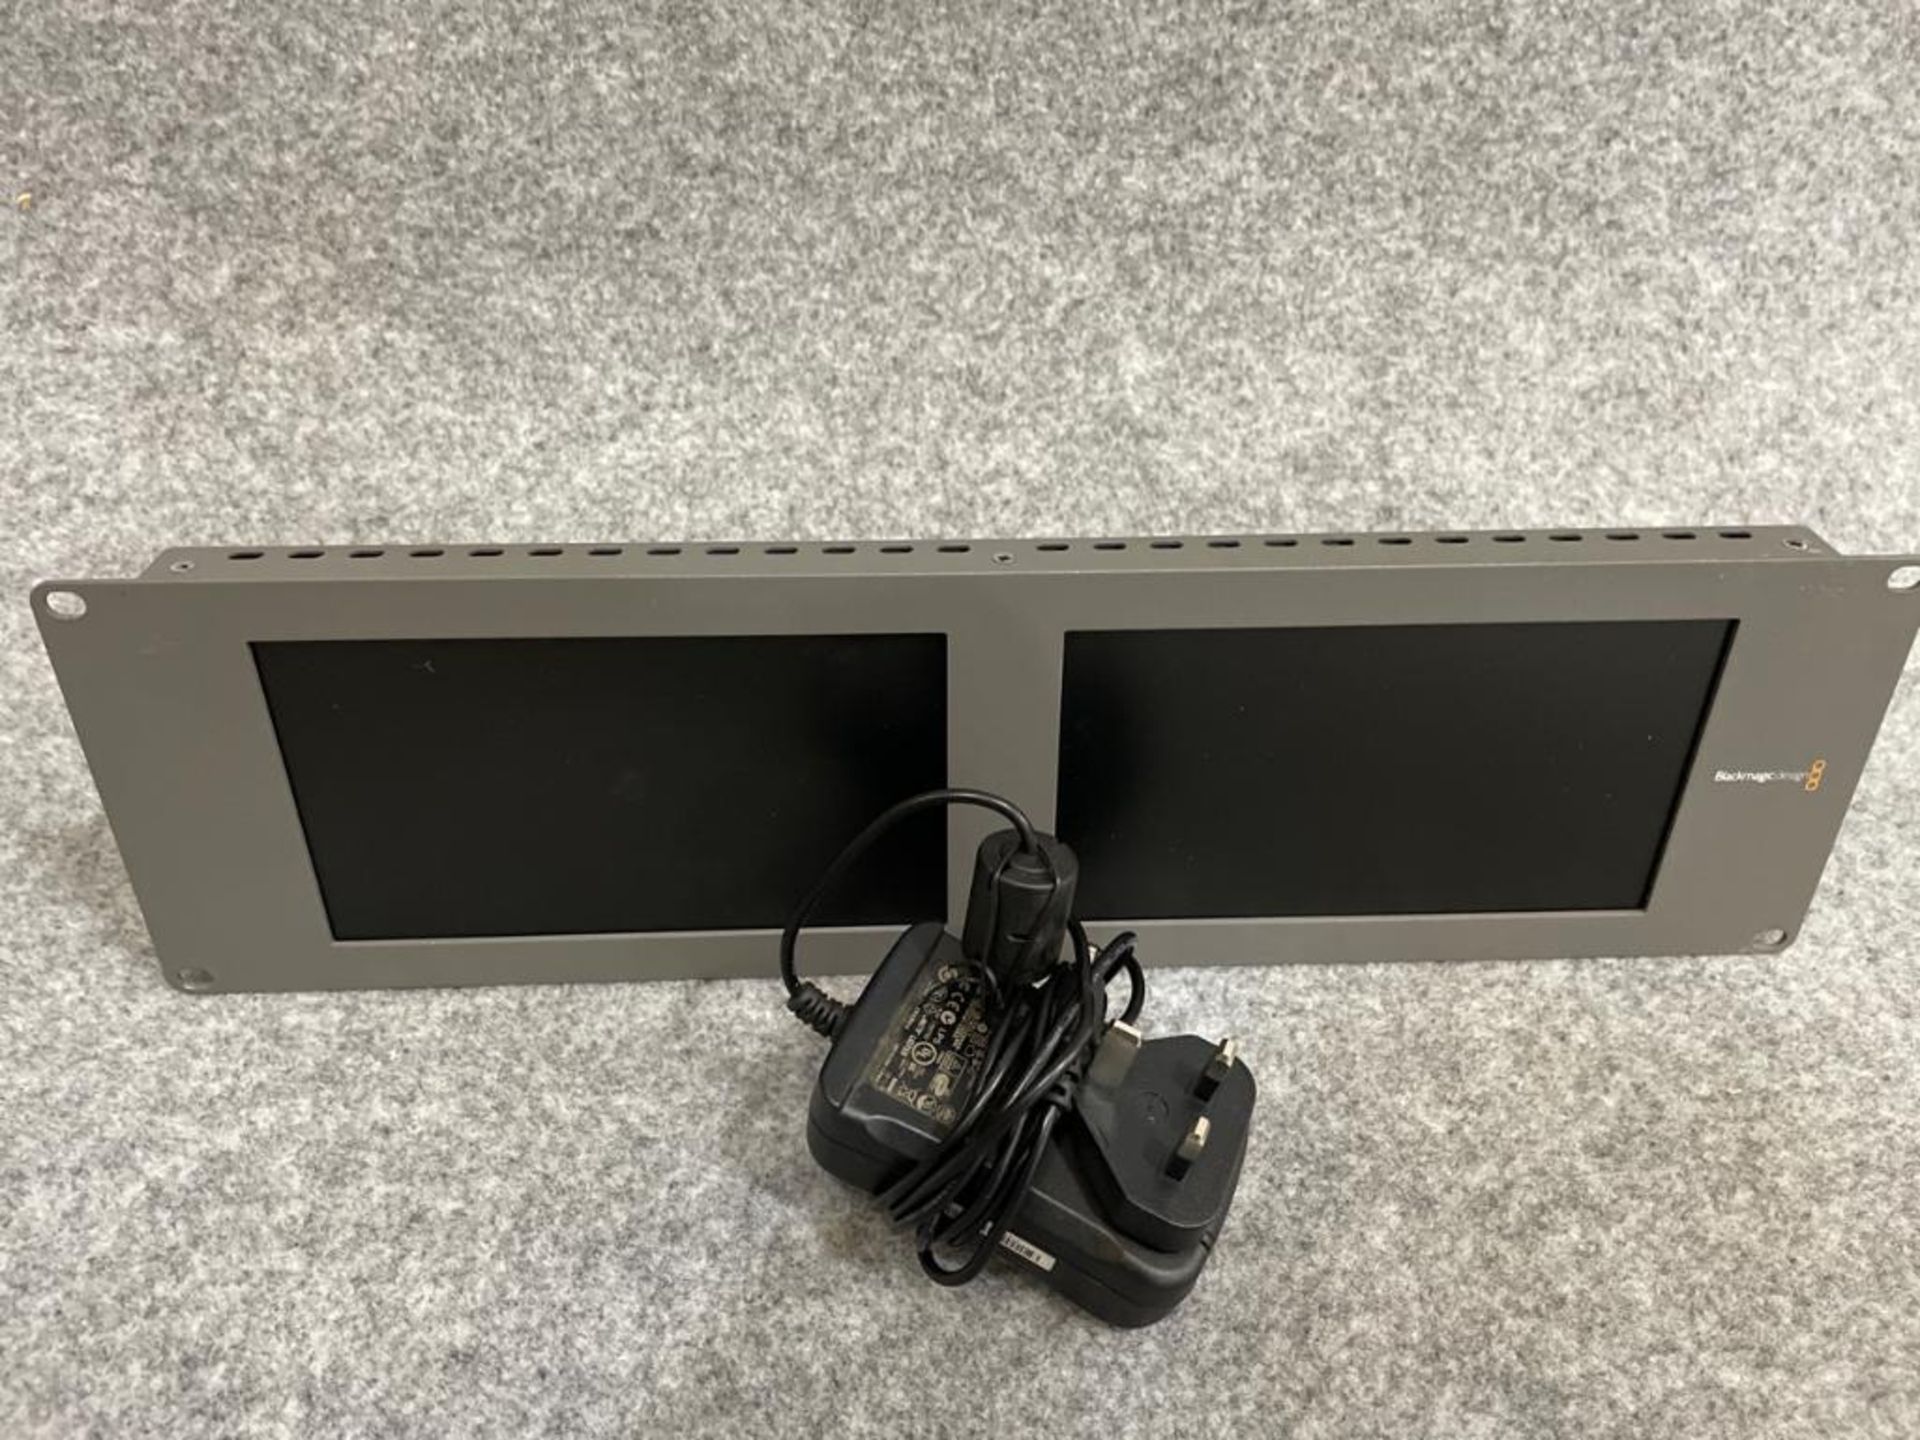 BlackMagic Dual HD Monitor with power supply SN: 1390771 - Image 3 of 3